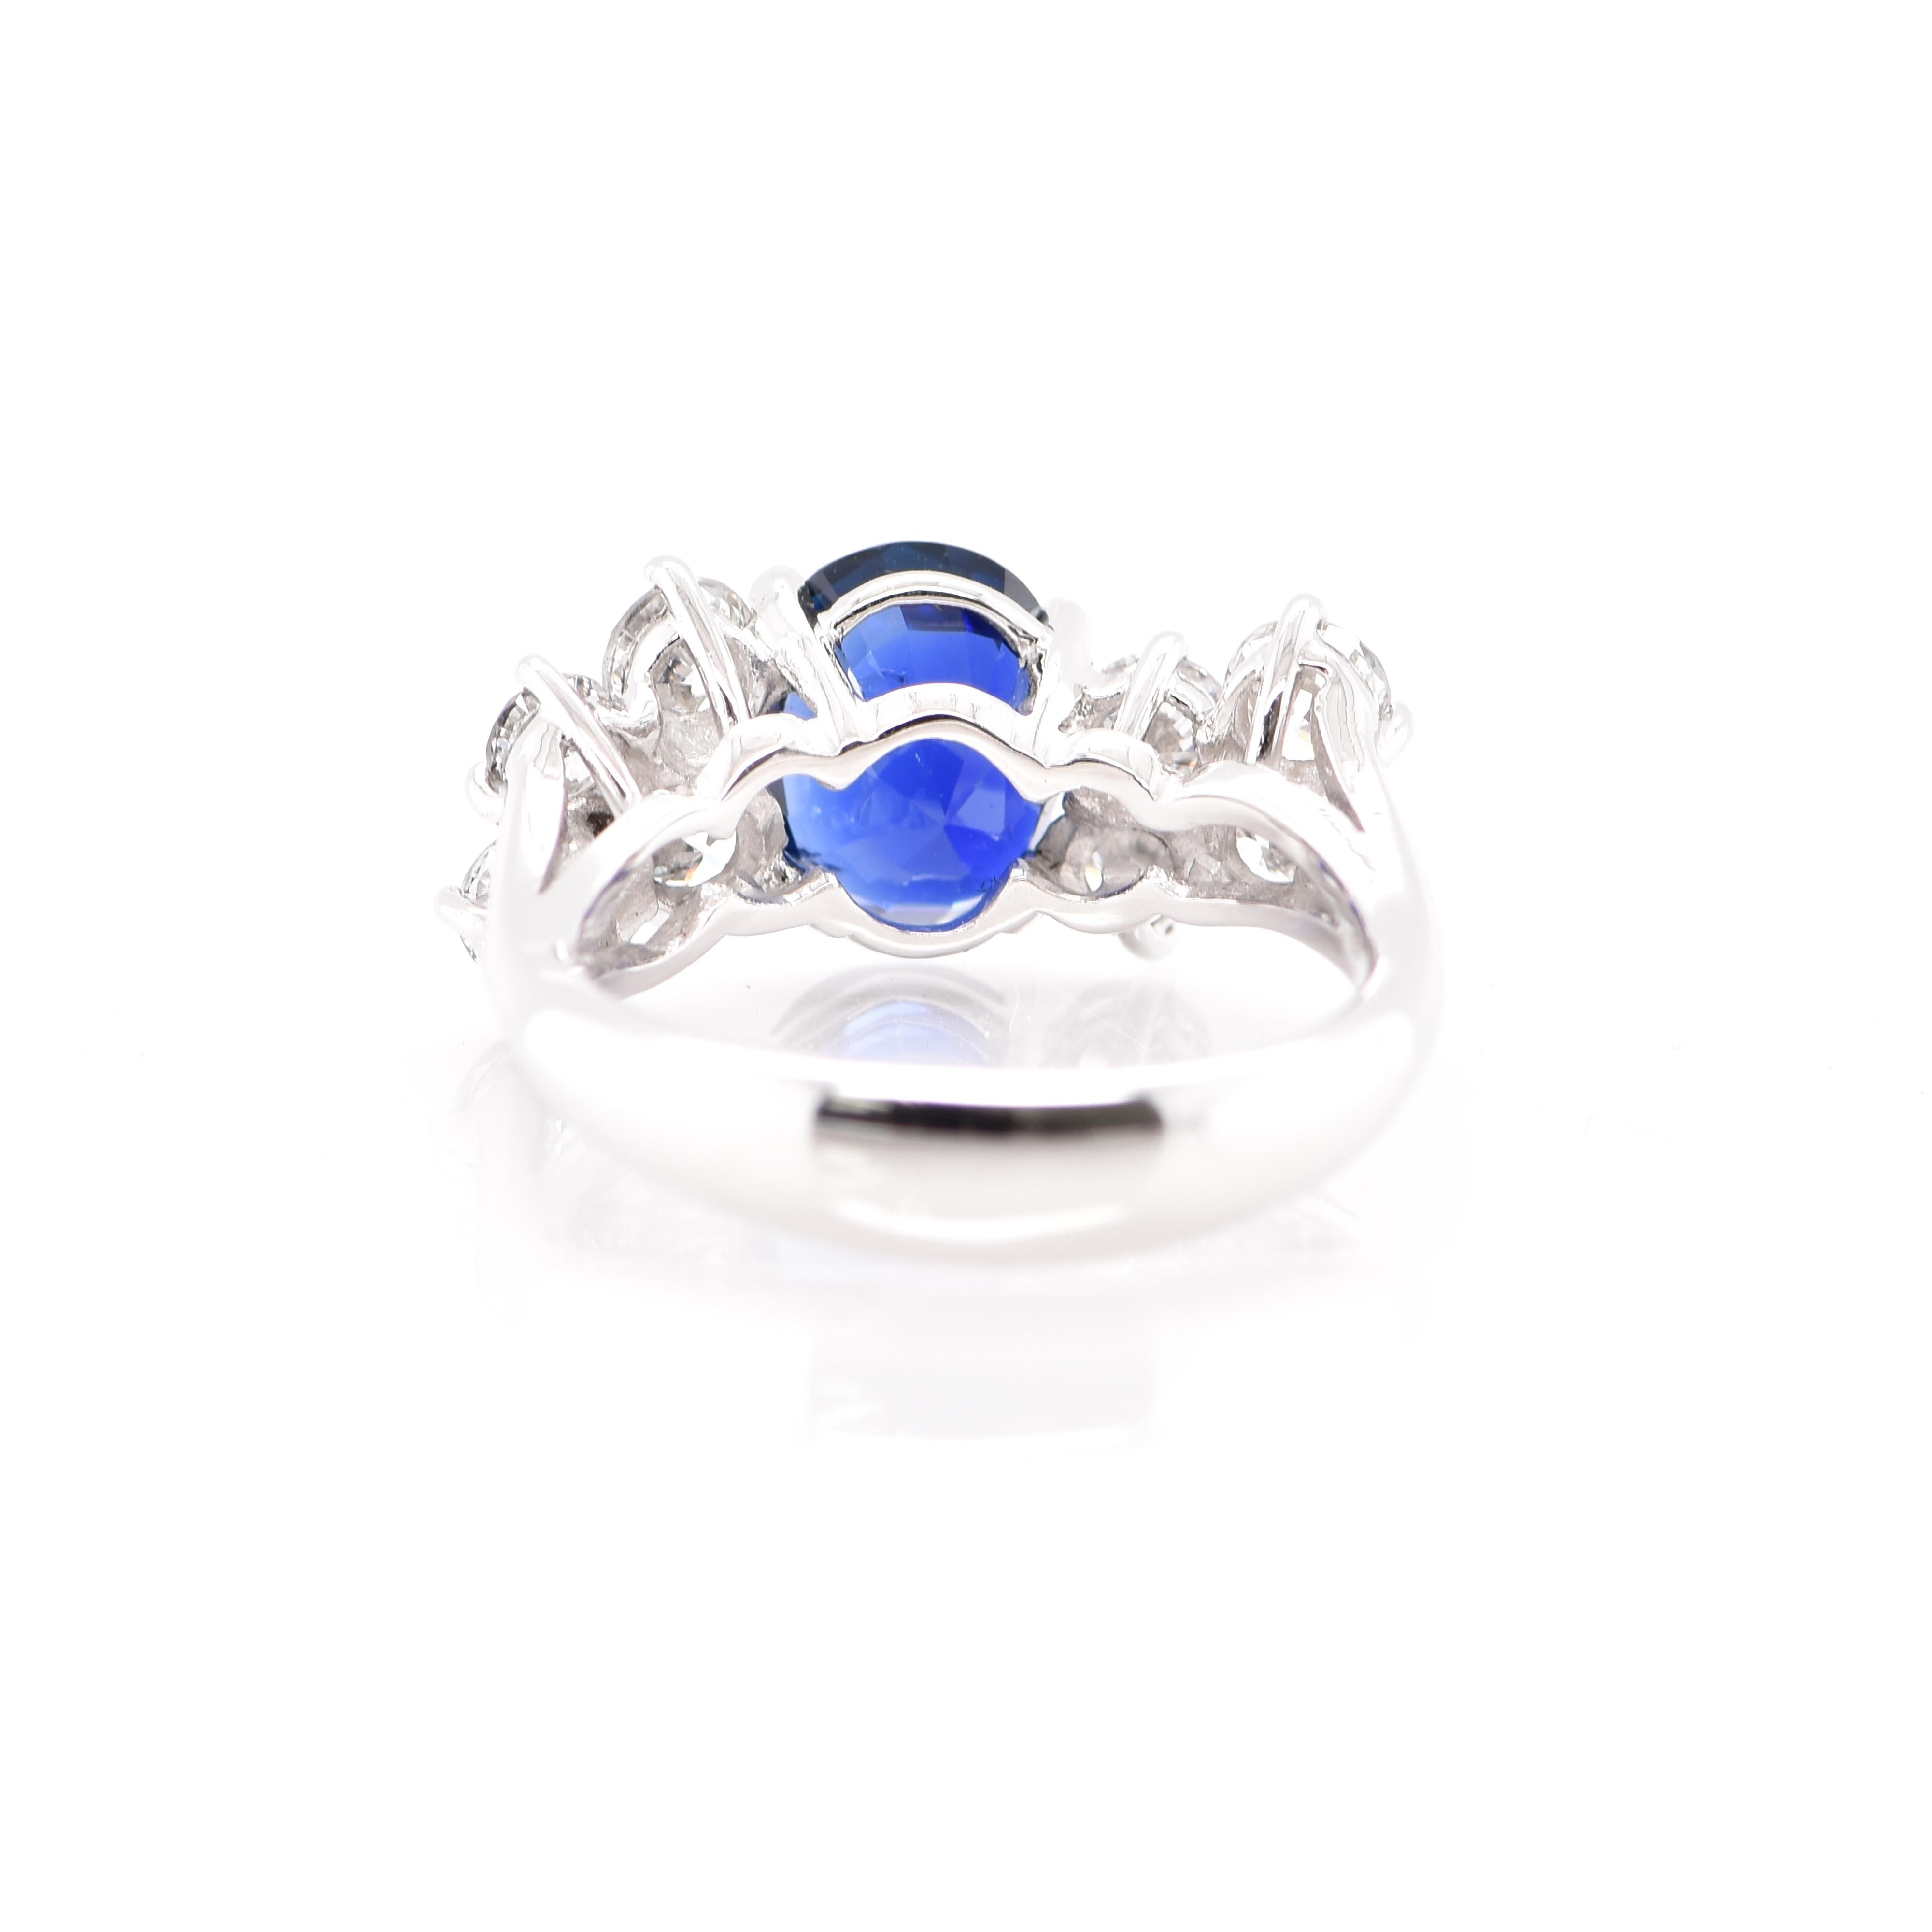 A stunning Engagement/Cocktail Ring featuring a GIA Certified 2.36 Carat Royal Blue, Untreated, Burmese Sapphire and 1.31 Carats of Diamond Accents set in Platinum. Sapphires have extraordinary durability - they excel in hardness as well as